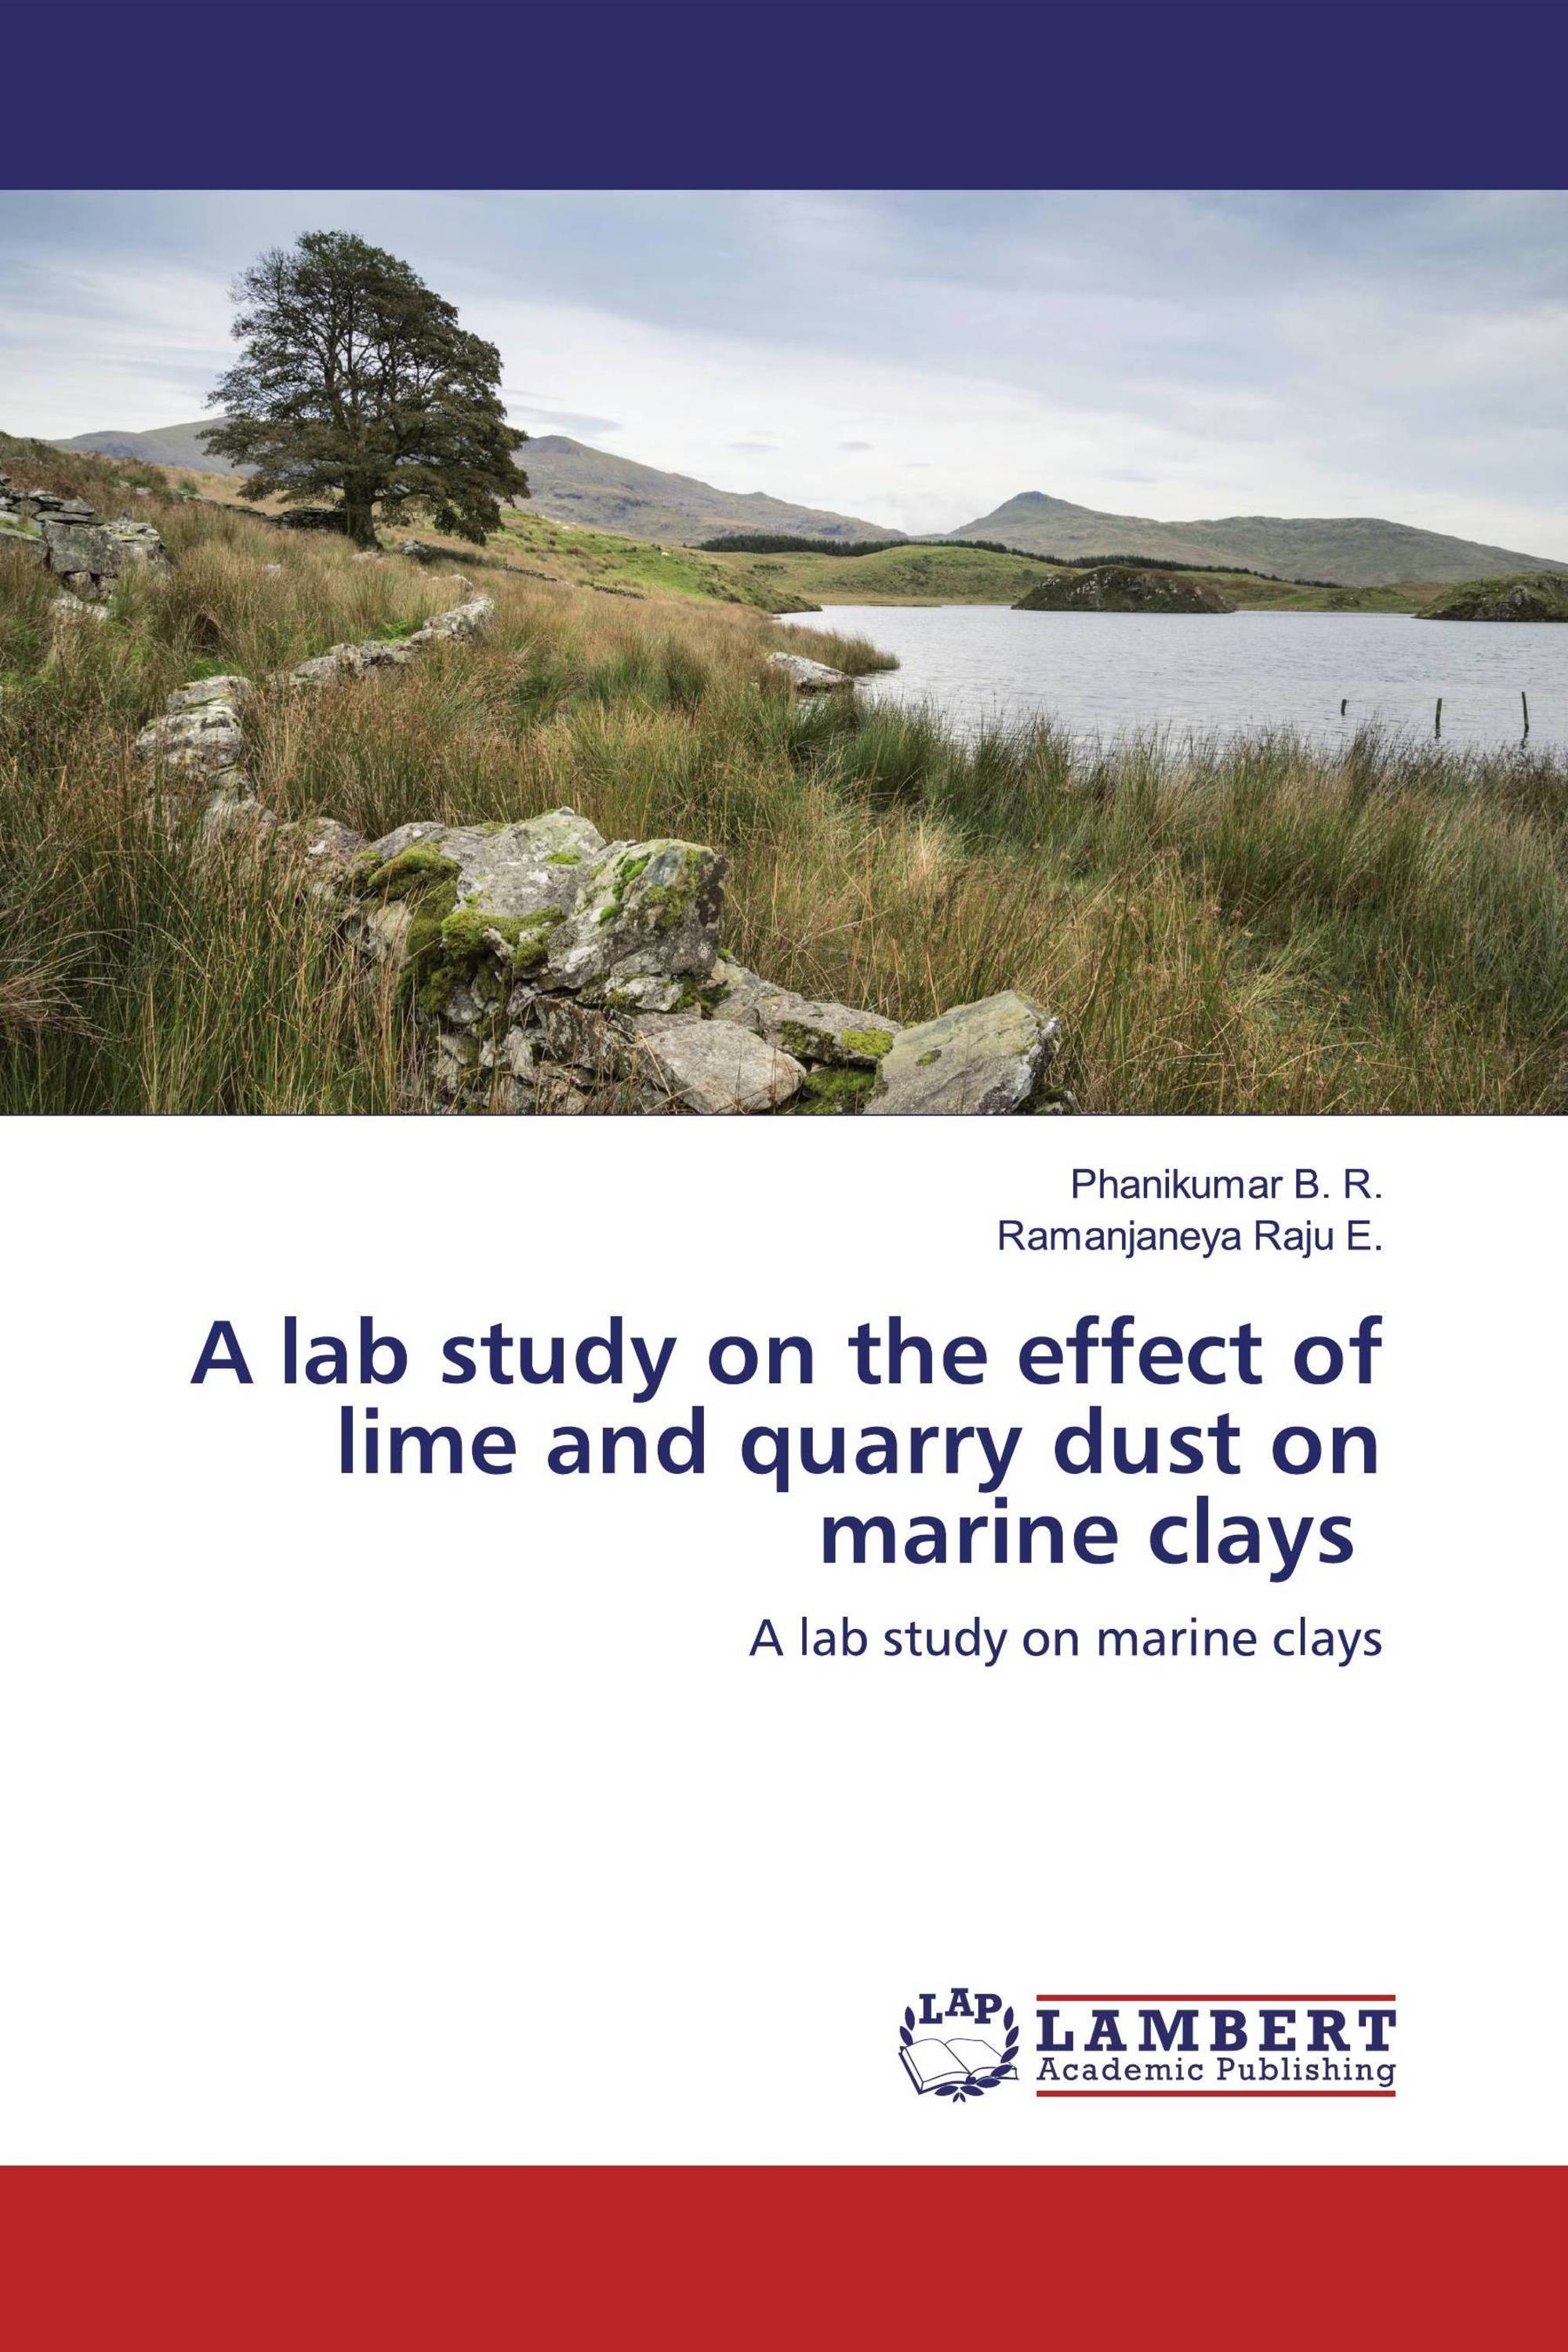 A lab study on the effect of lime and quarry dust on marine clays